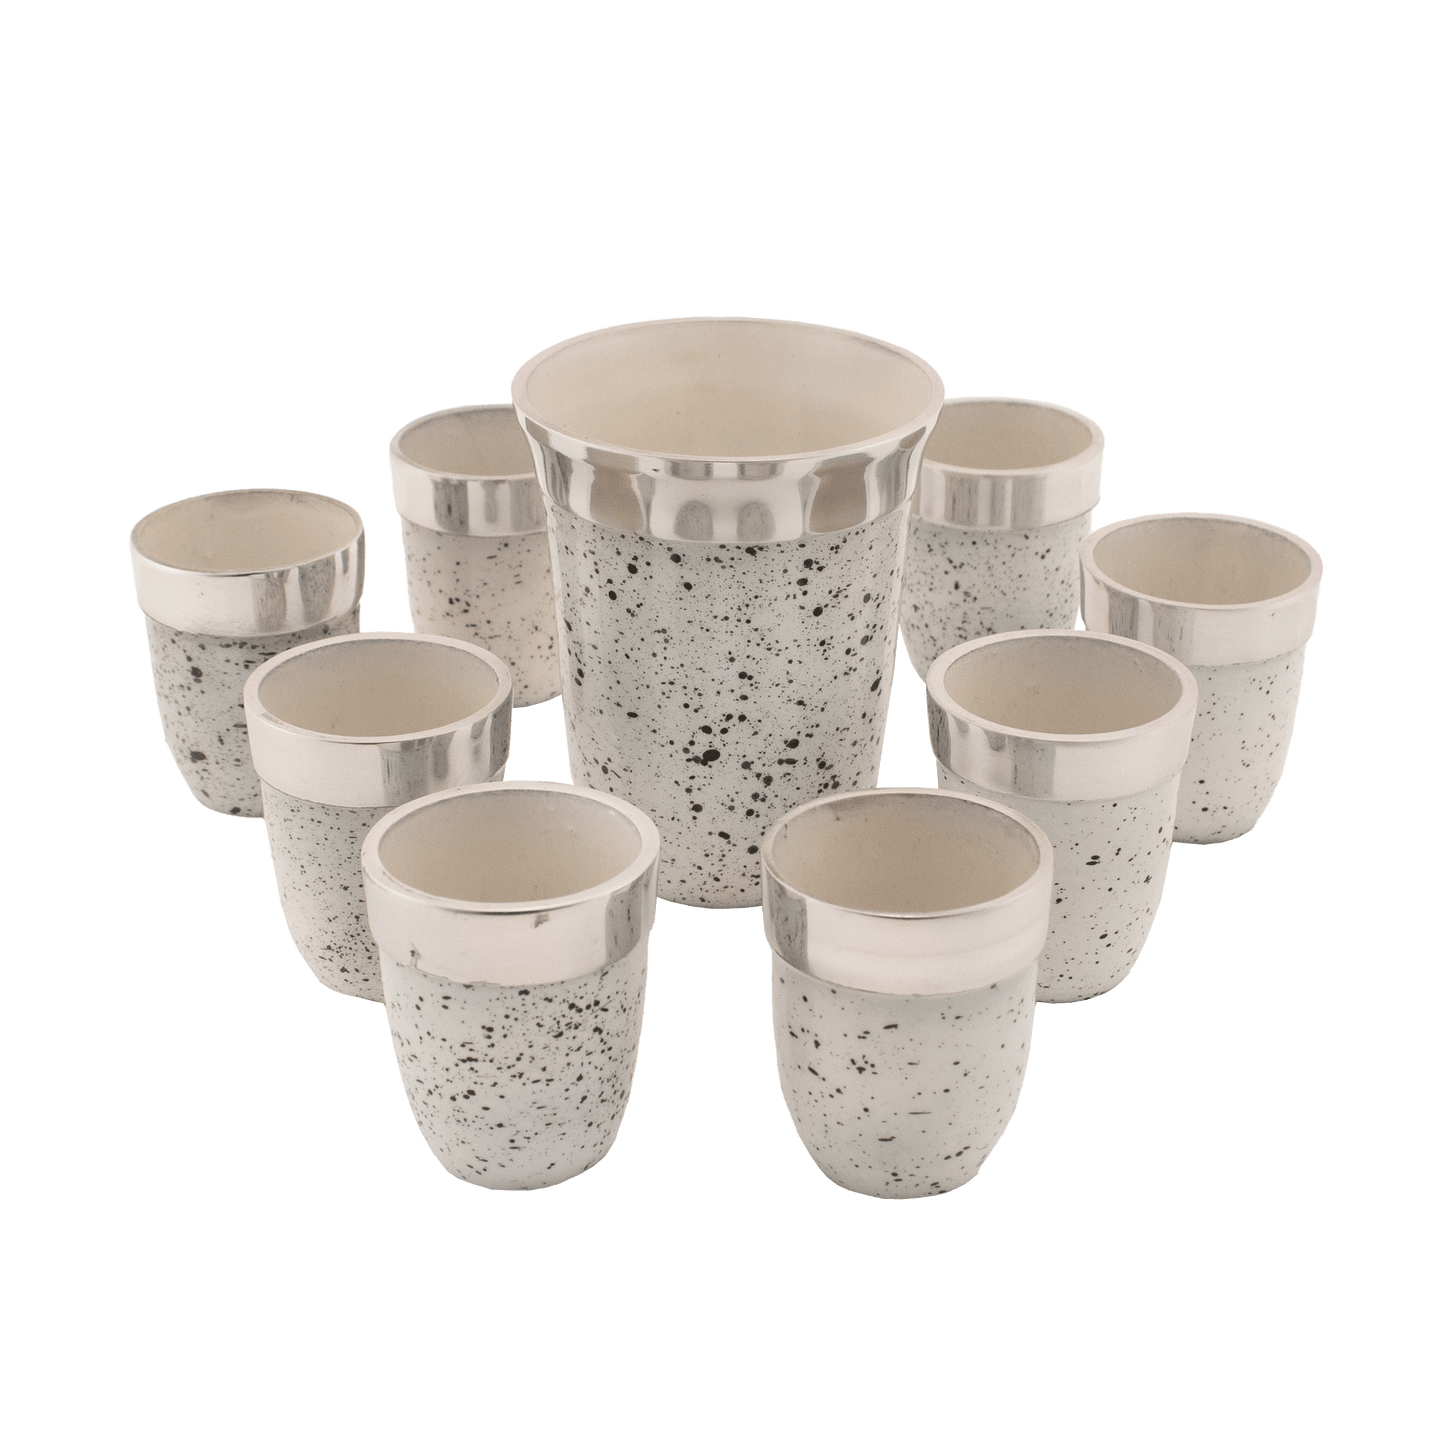 Aluminium Wine Divider With Kiddush Cups - Speckled